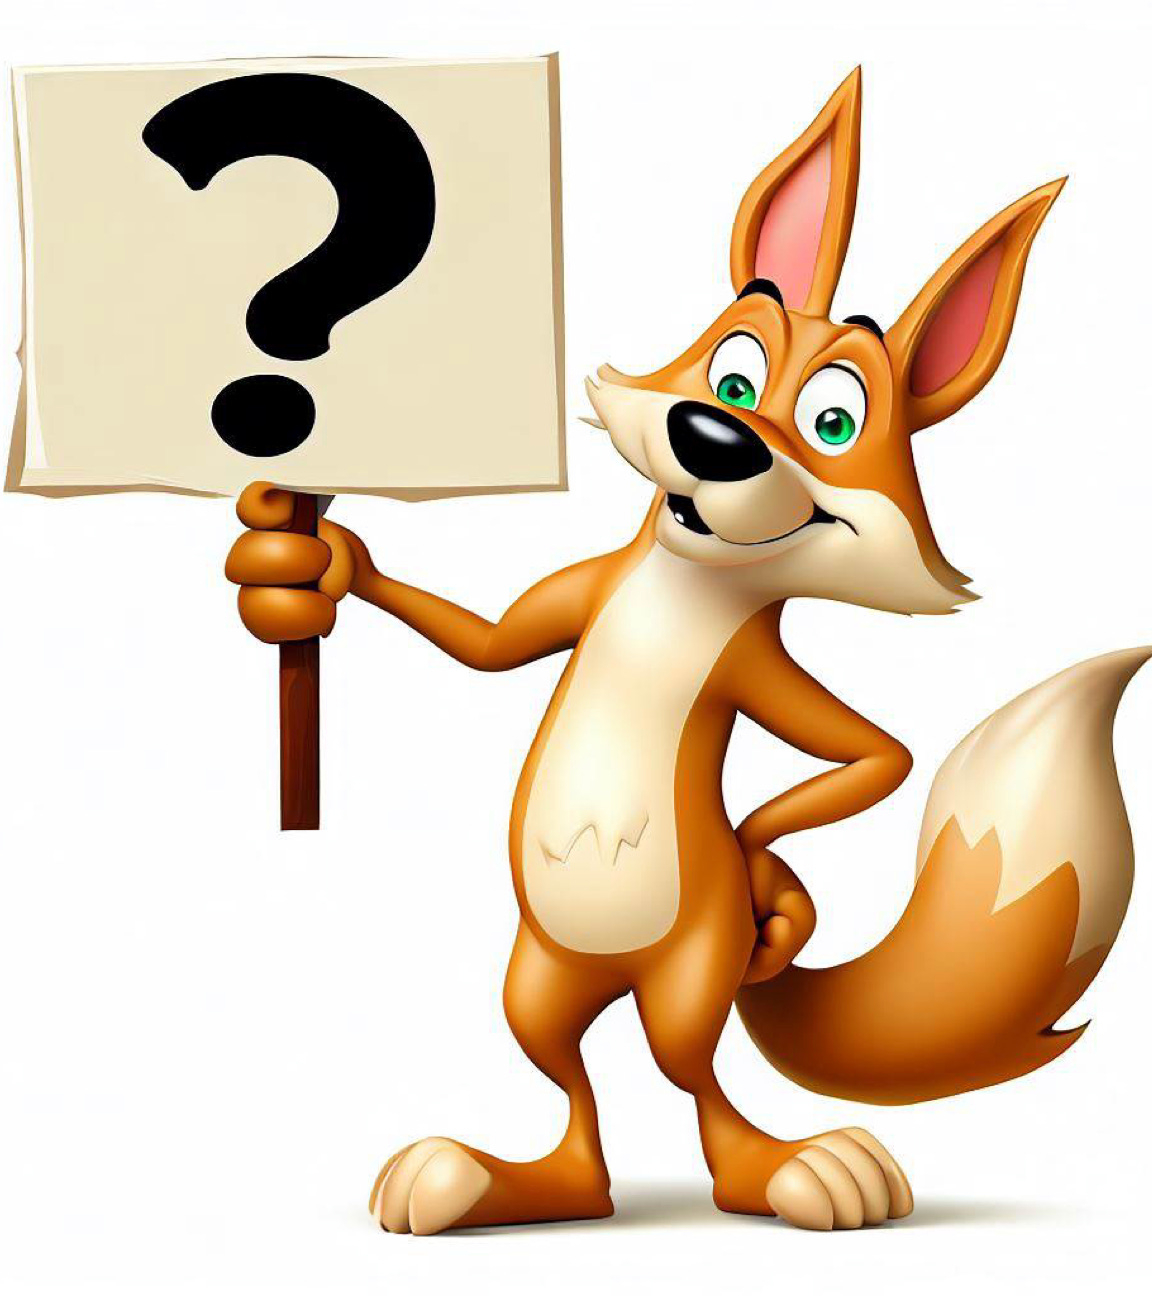 An animated coyote holding up a sign with a question mark